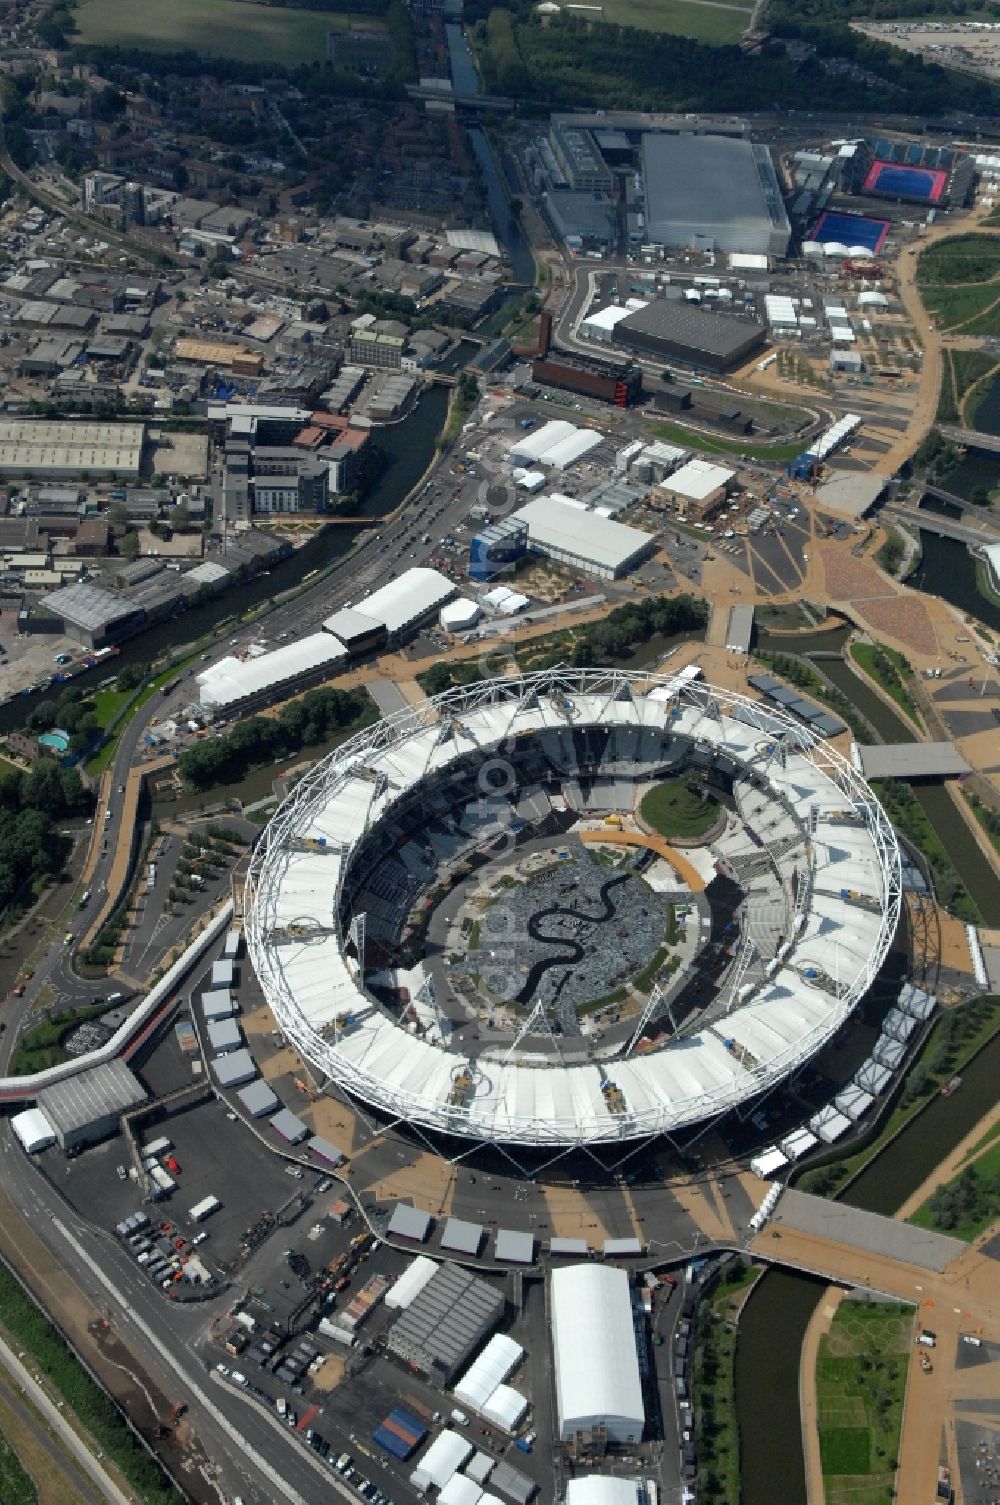 London from the bird's eye view: The Olympic Stadium in Olympic Park, London, England, is designed to be the centrepiece of the 2012 Summer Olympics and 2012 Summer Paralympics, and the venue of the athletic events as well as the Olympic Games opening and closing ceremonies in Great Britain